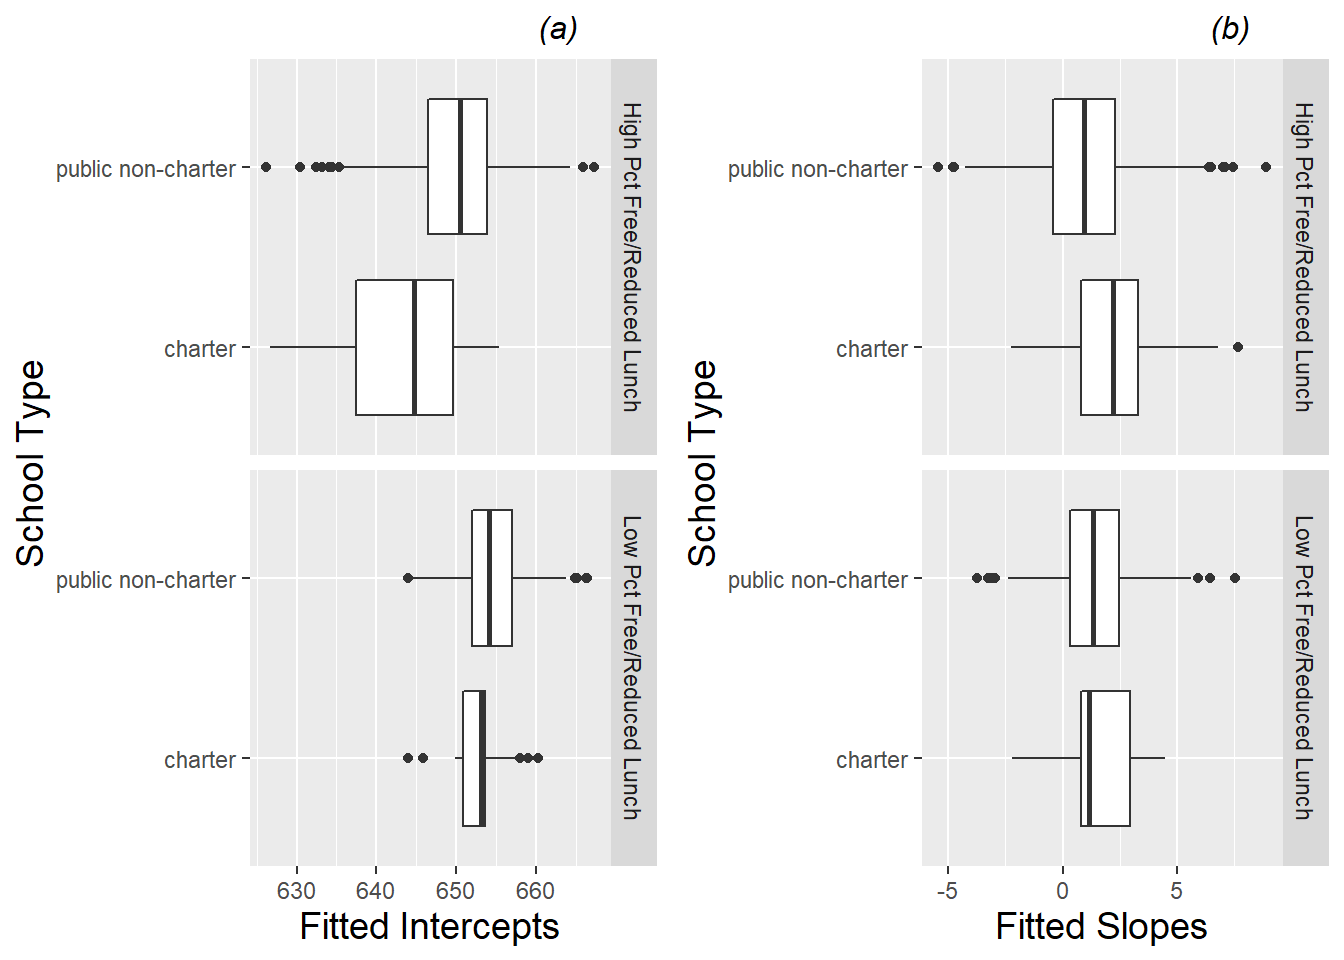 Boxplots of (a) intercepts and (b) slopes from fitted regression lines by school vs. school type (charter vs. public non-charter), separated by high and low levels of percent free and reduced lunch.